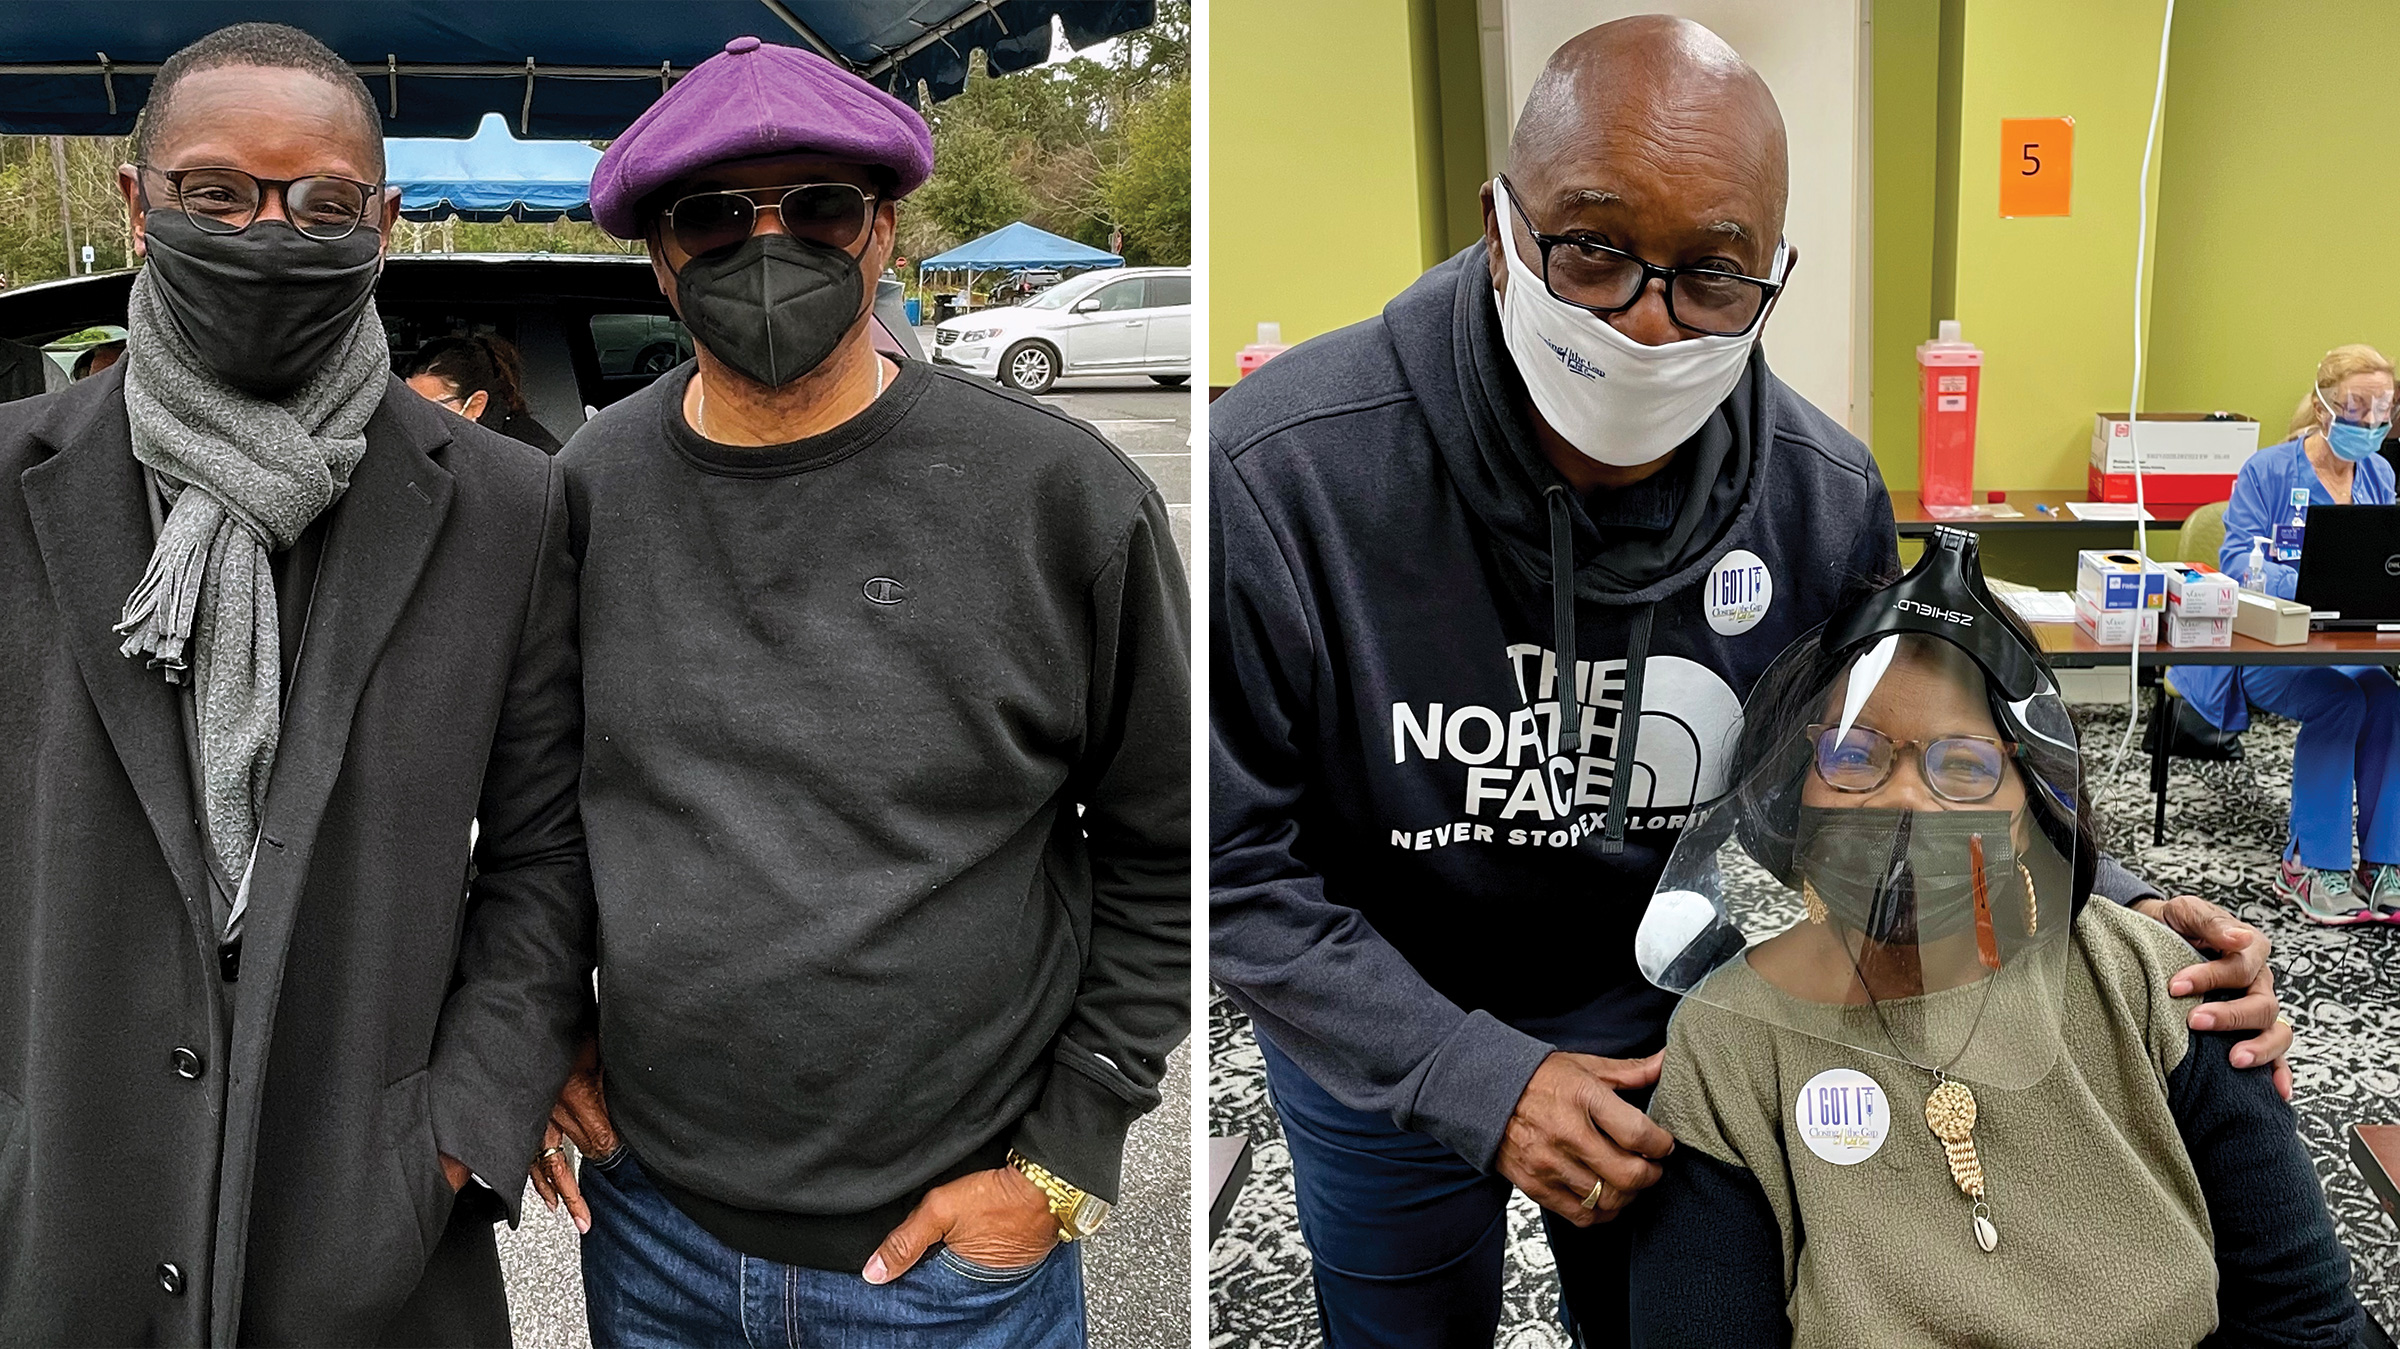 Left: Pastor Kylon Middleton, with Dr. Thaddeus Bell at East Cooper Medical Center in Mount Pleasant, S.C. on March 13; Right: Dr. Thaddeus Bell, with Henrietta Snype at East Cooper Medical Center in Mount Pleasant, S.C. on March 19. (Courtesy Tony Clarke)